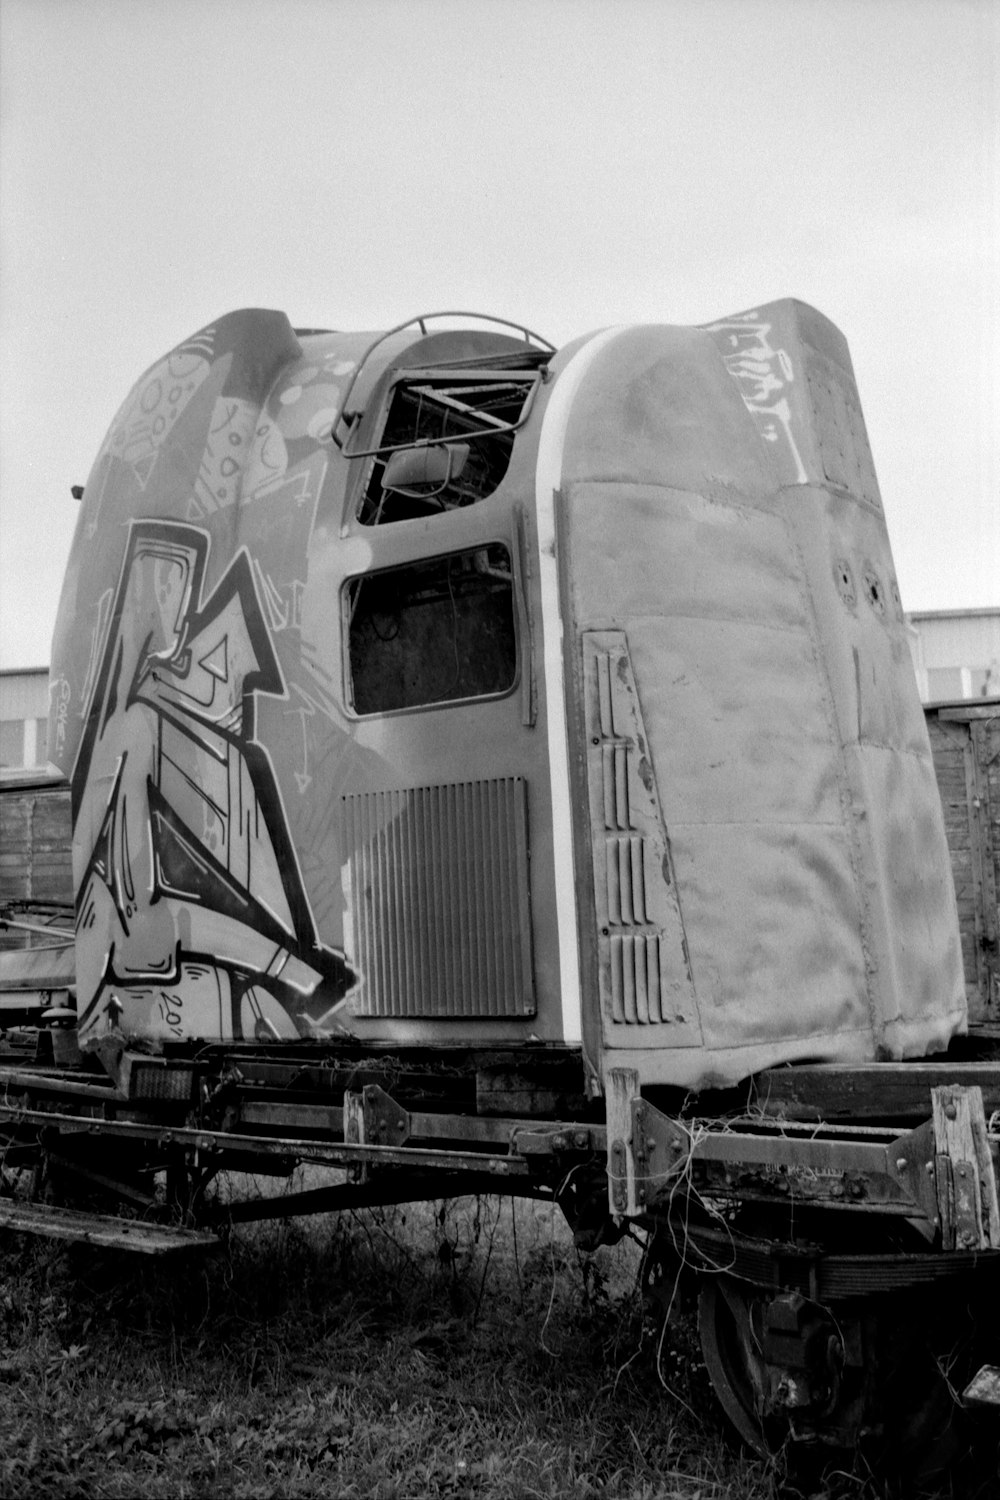 a black and white photo of a train car with graffiti on it